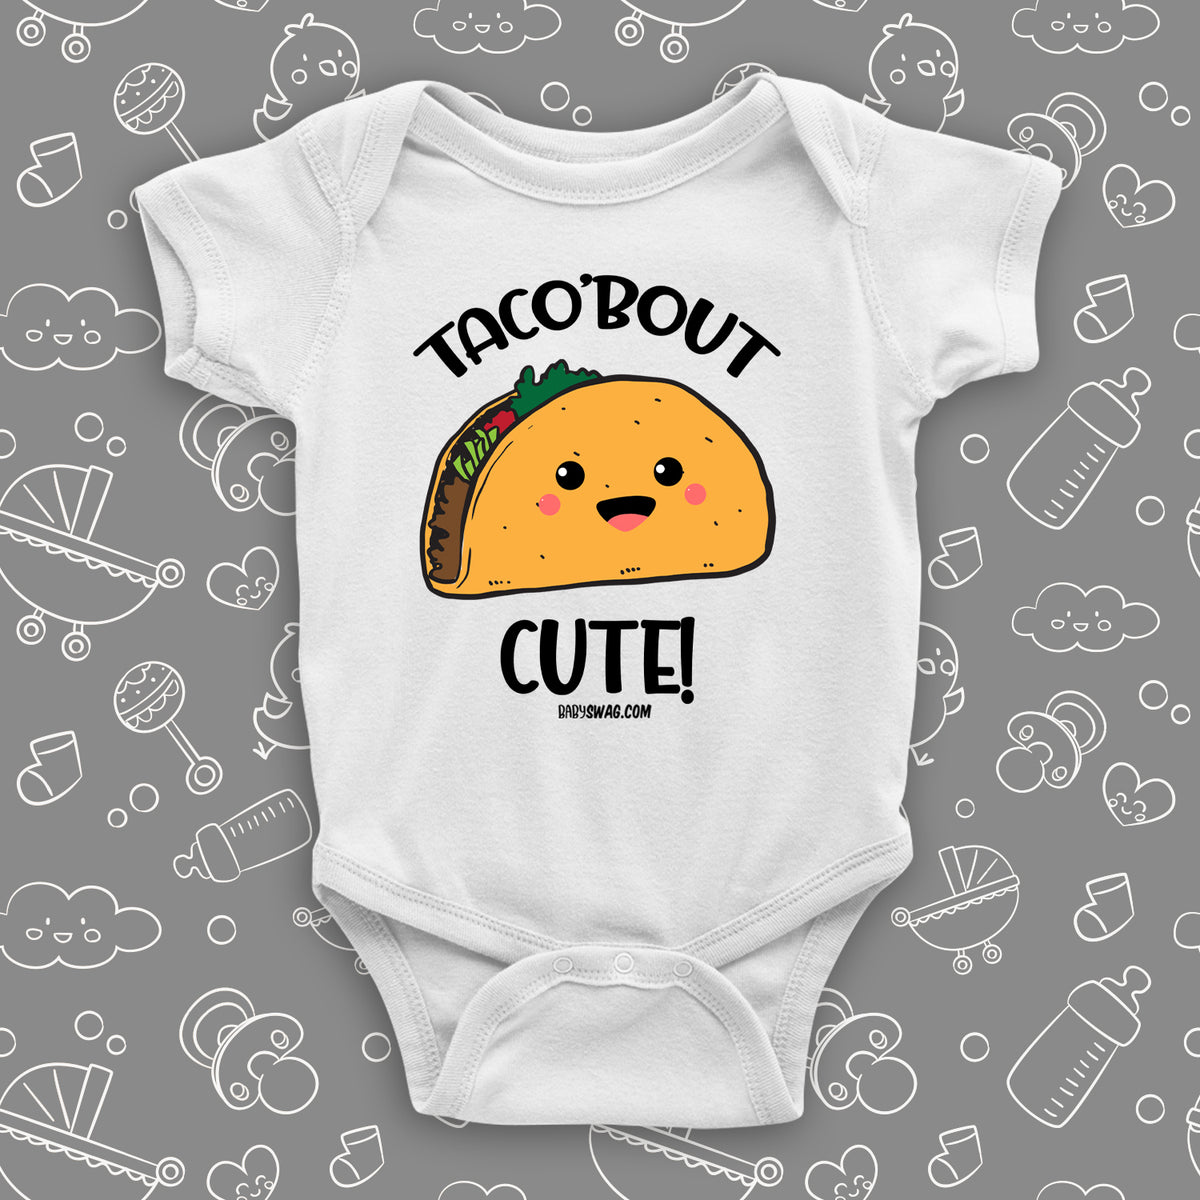 0-3 months Taco bout cute funny shirt cute Baby Onesie Funny toddler boy girl shirt Taco bout cute Baby Clothes funny Baby Onesie funny kids shirt 